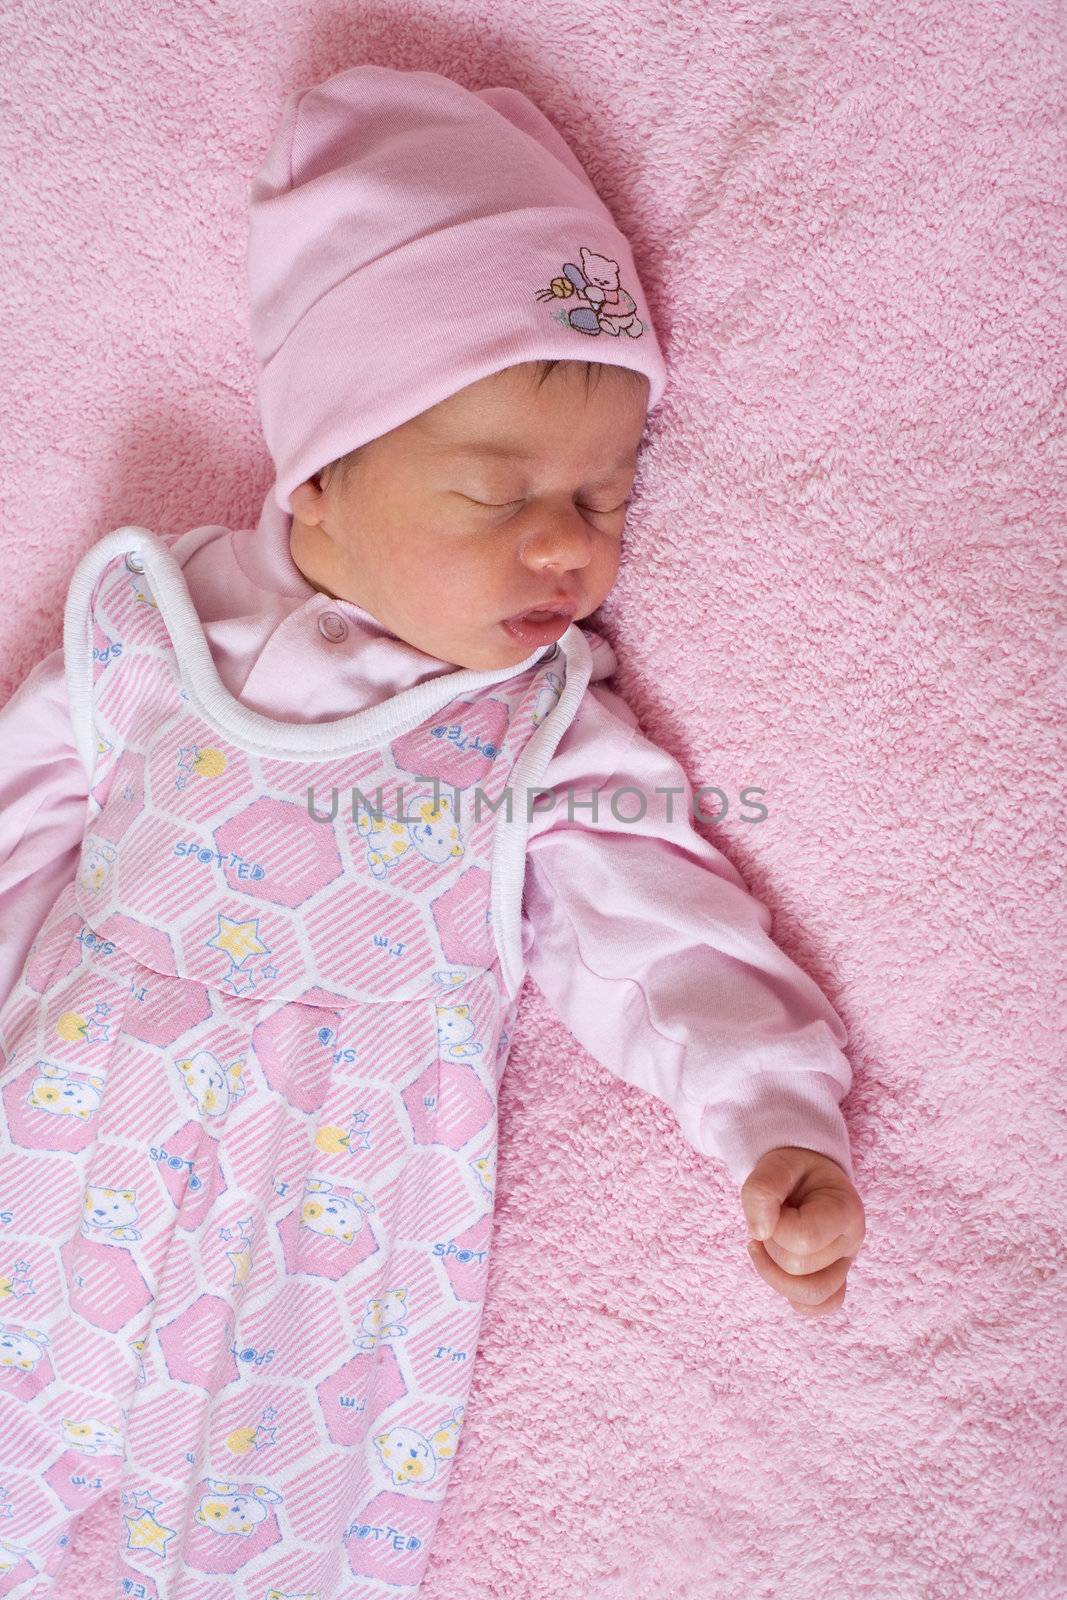 children series: slepping newborn baby in pink color